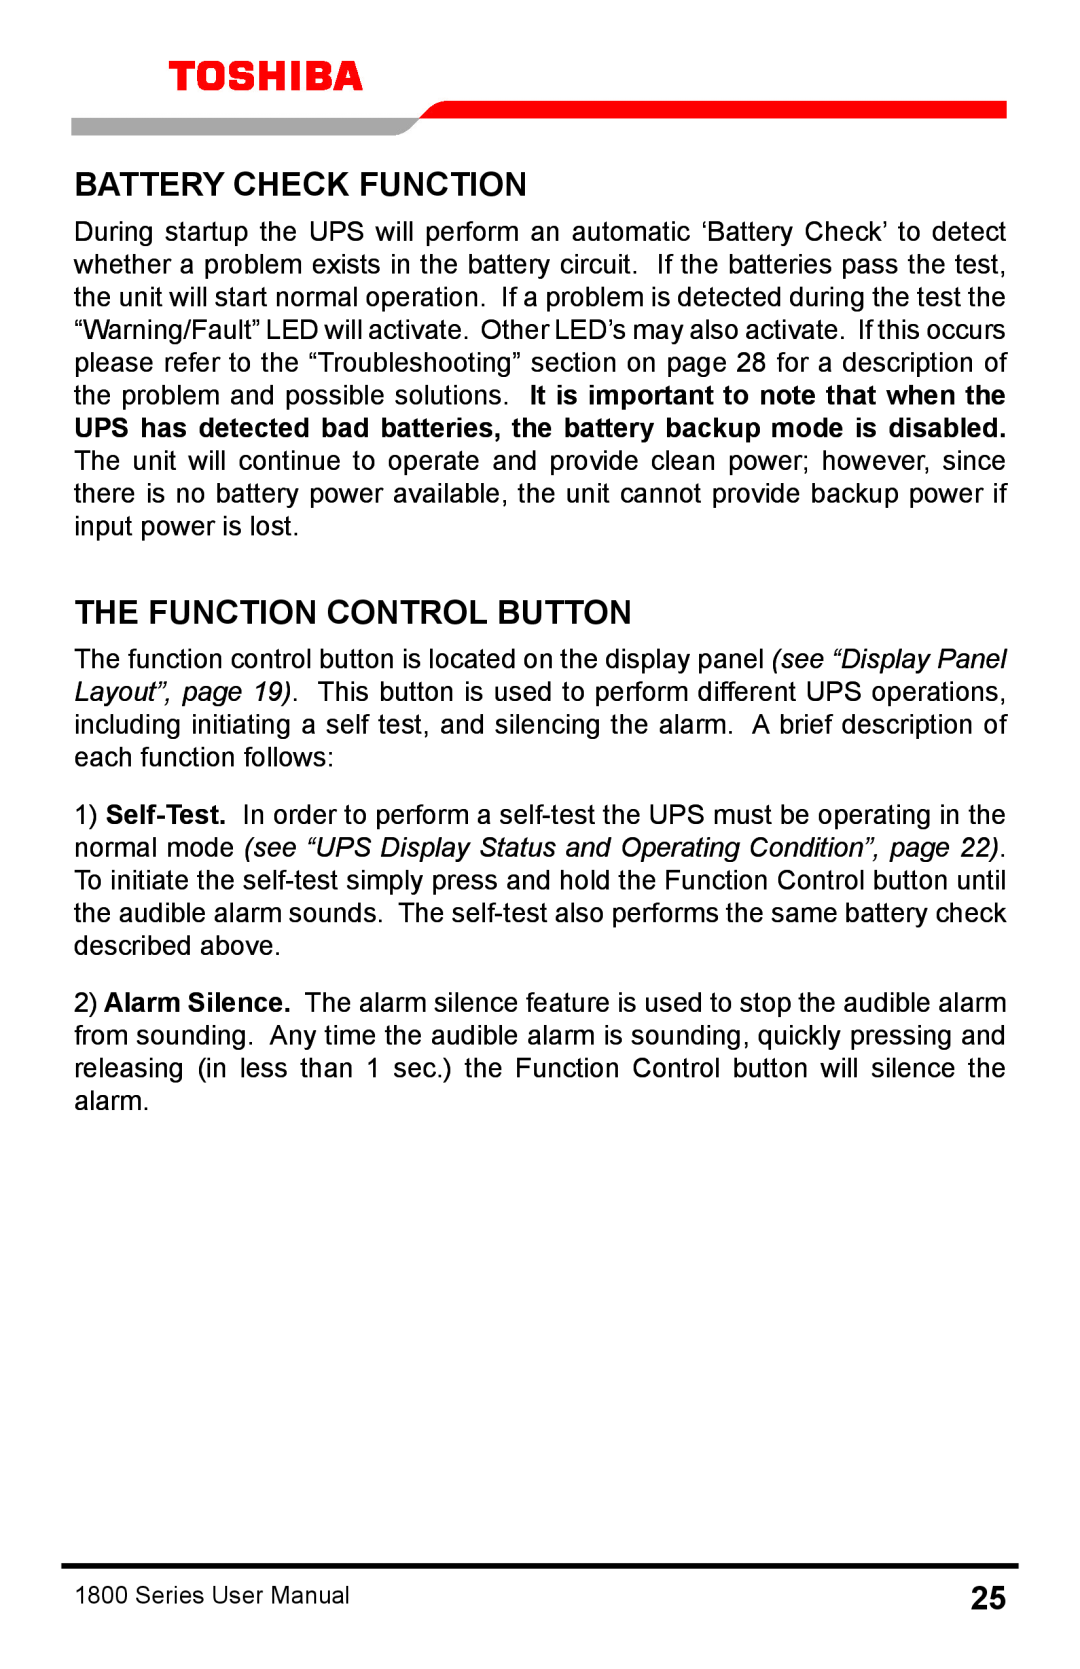 Toshiba 1800 manual Battery Check Function, The Function Control Button 